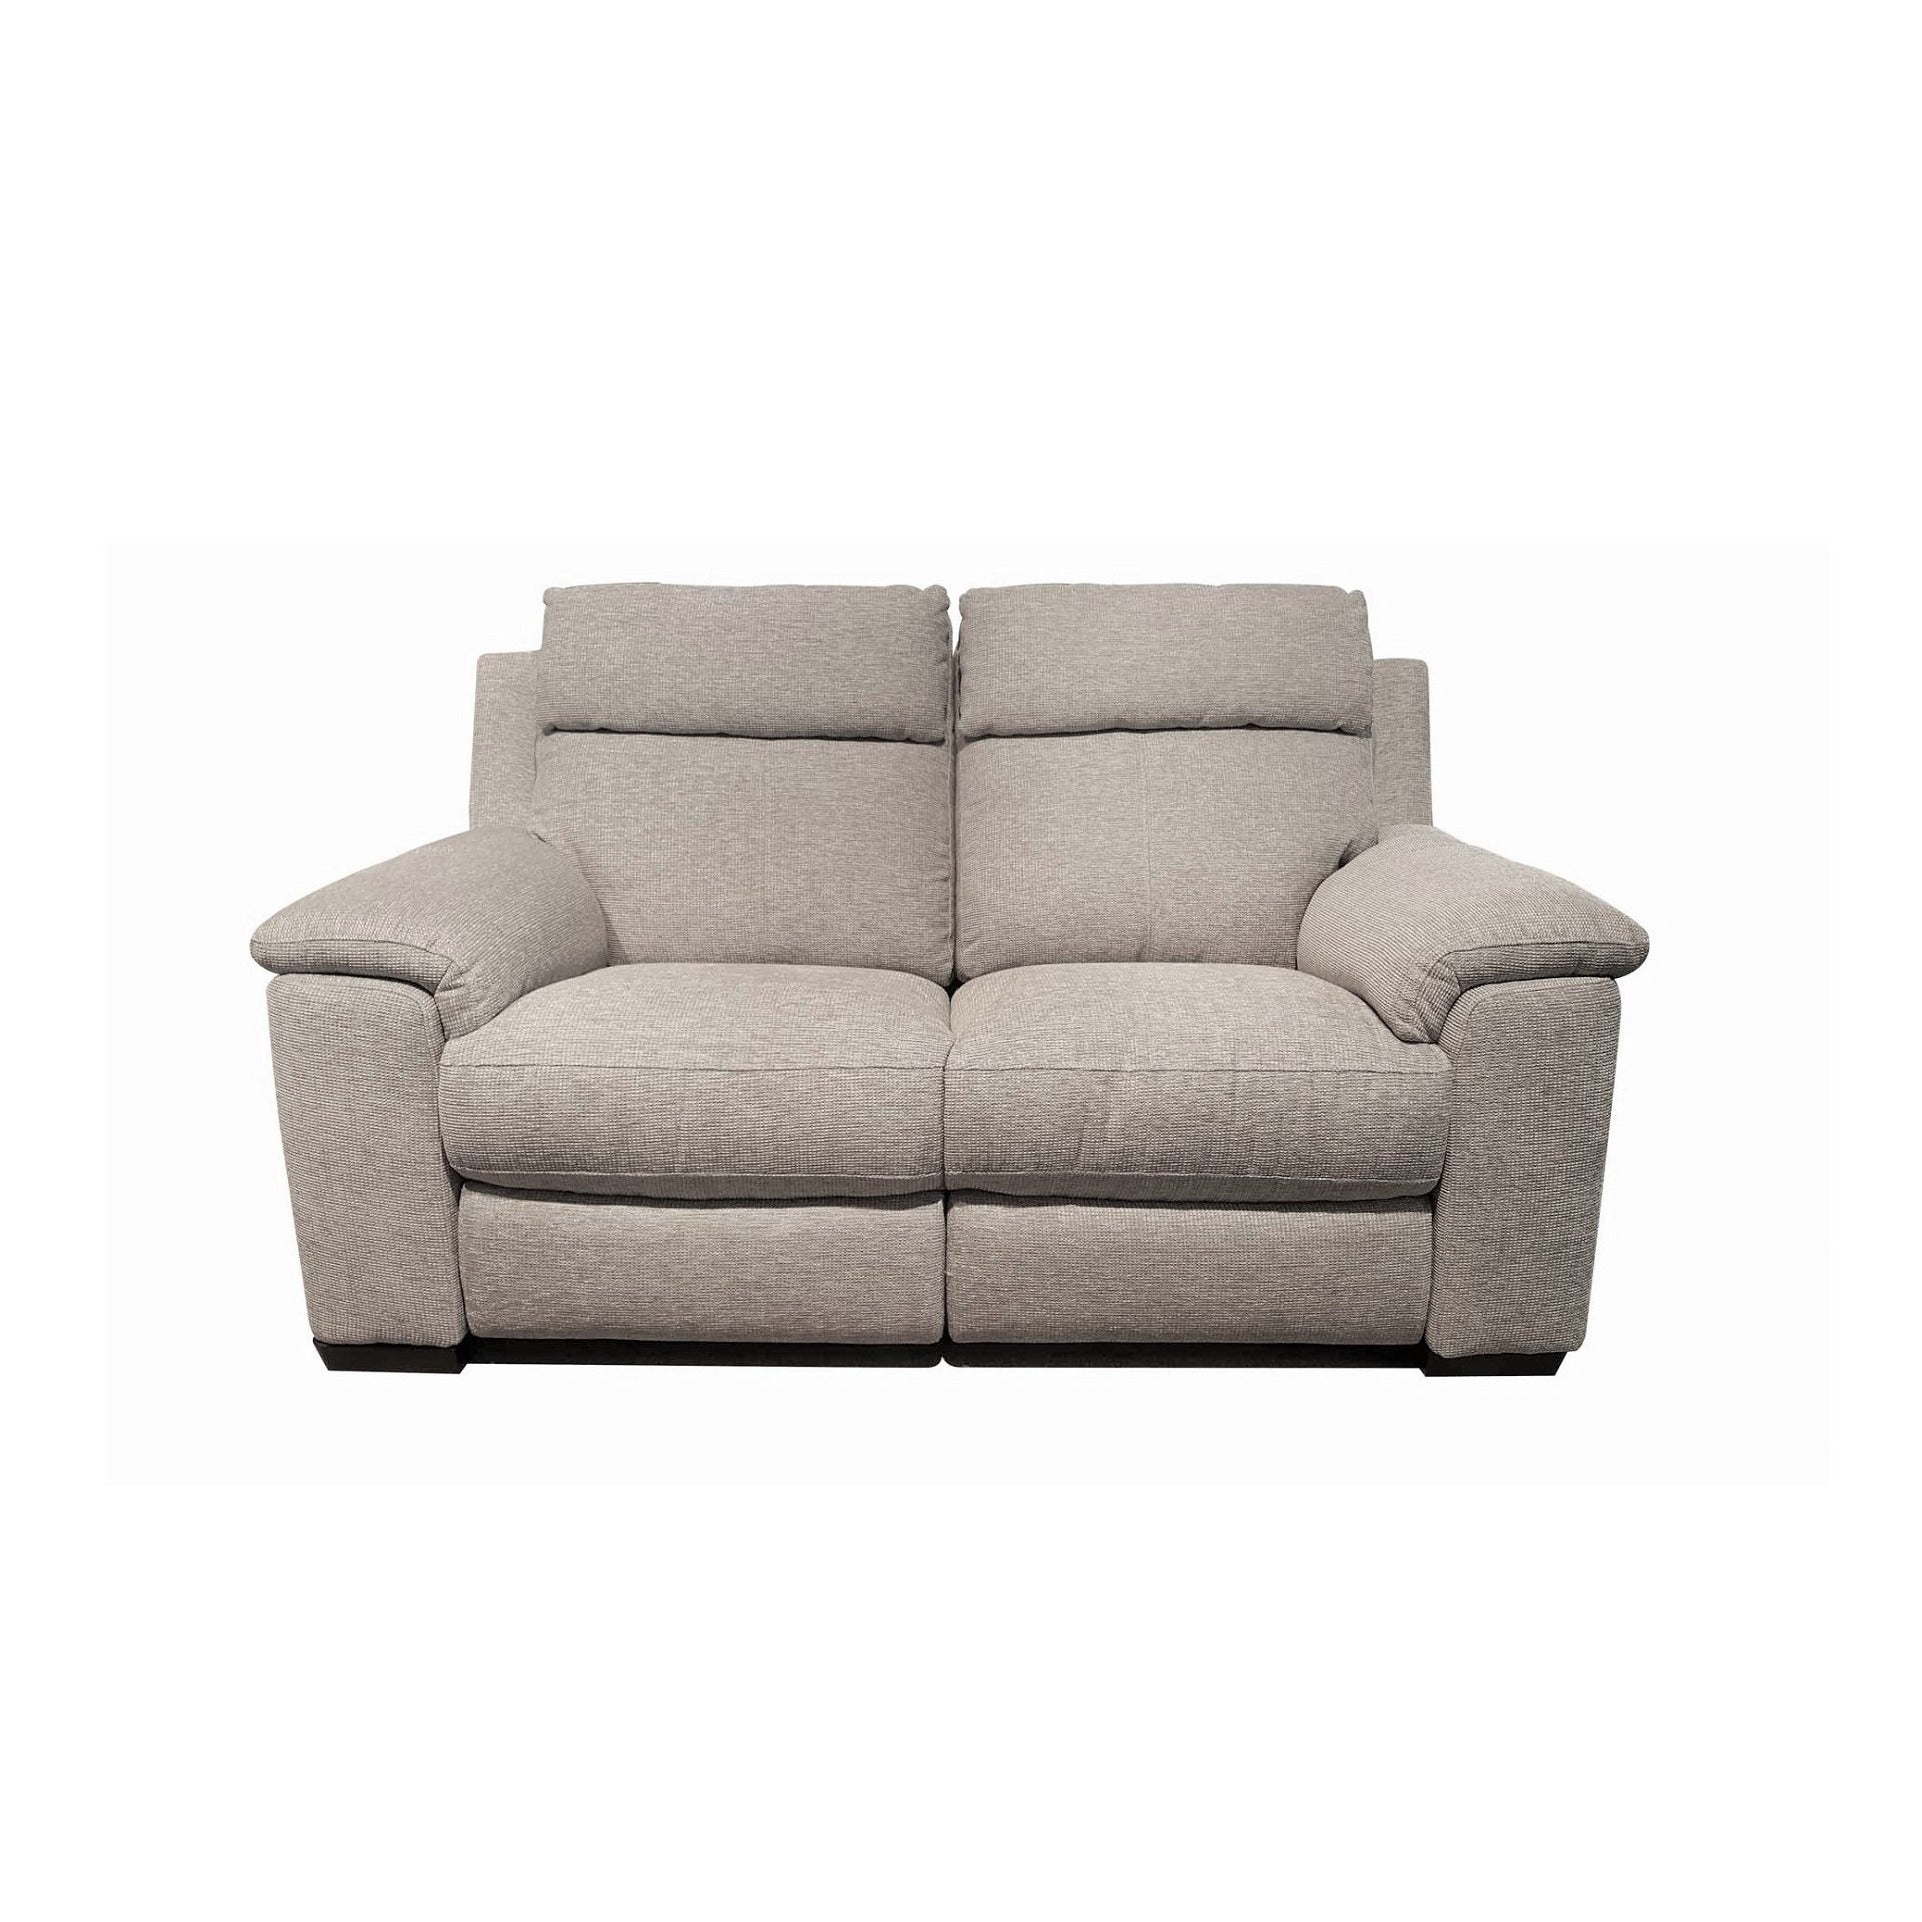 Thompson 2 Seater Electric Reclining Sofa